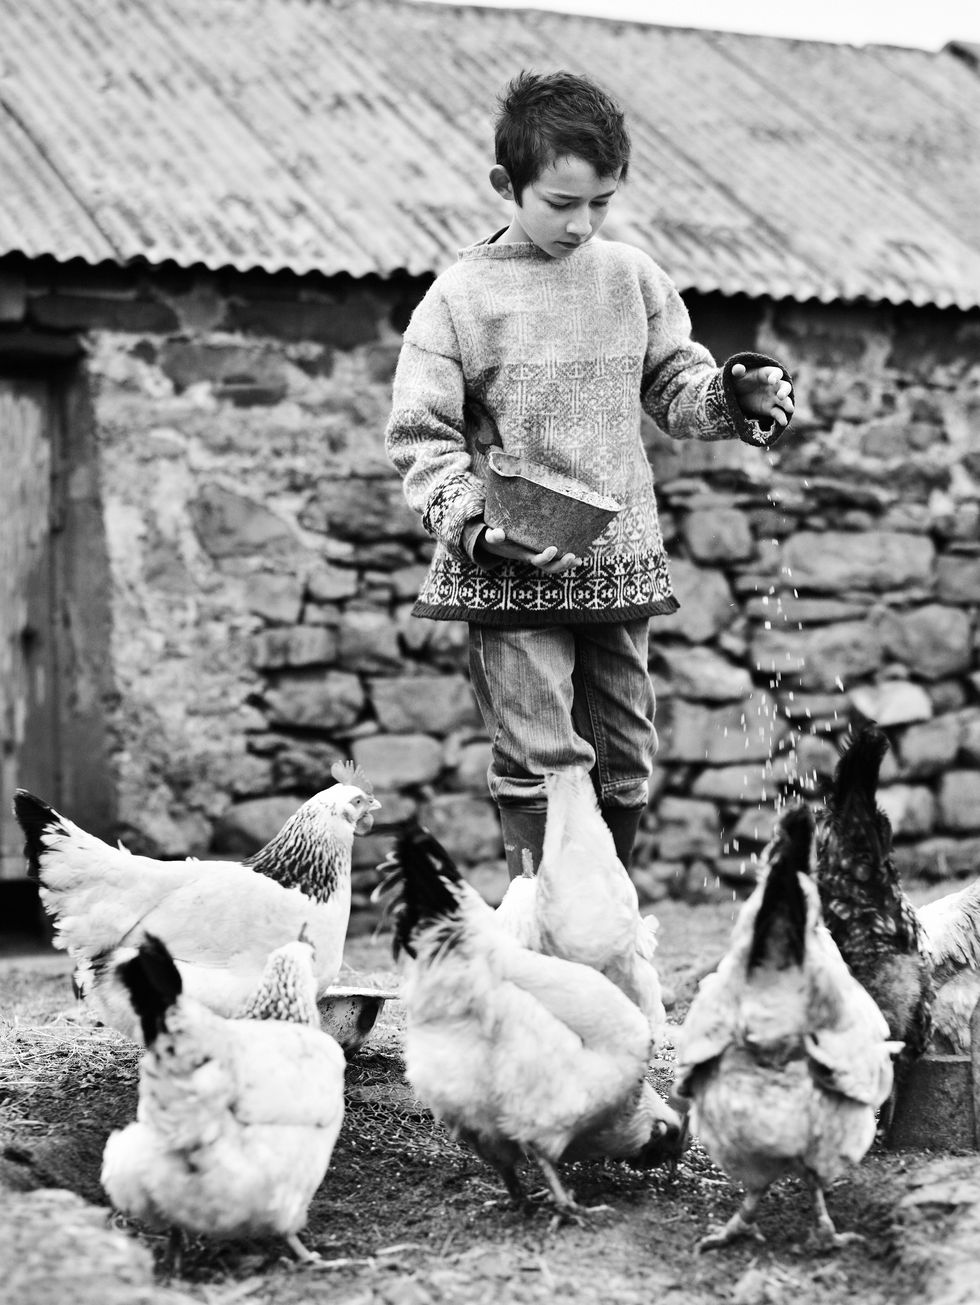 a young boy holding a book and standing in front of a group of chickens